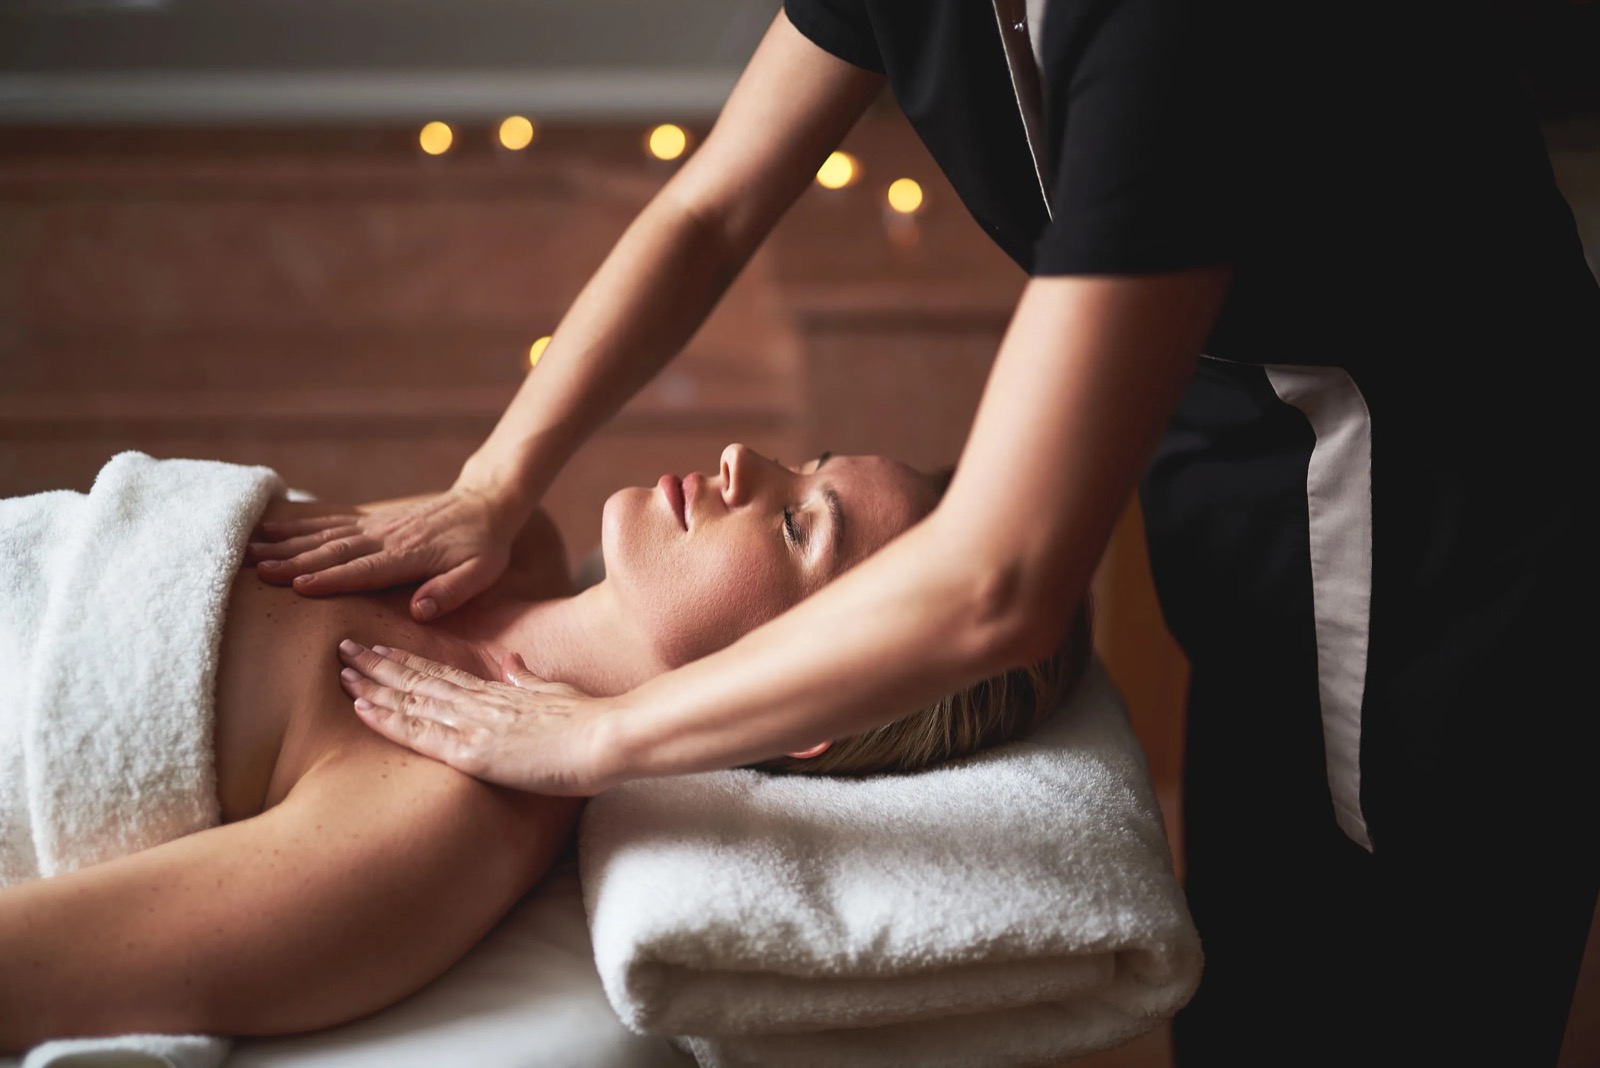 We Know How Relaxed You Are Based on the Self-Care Activities You’ve Done Recently Spa Massage 2